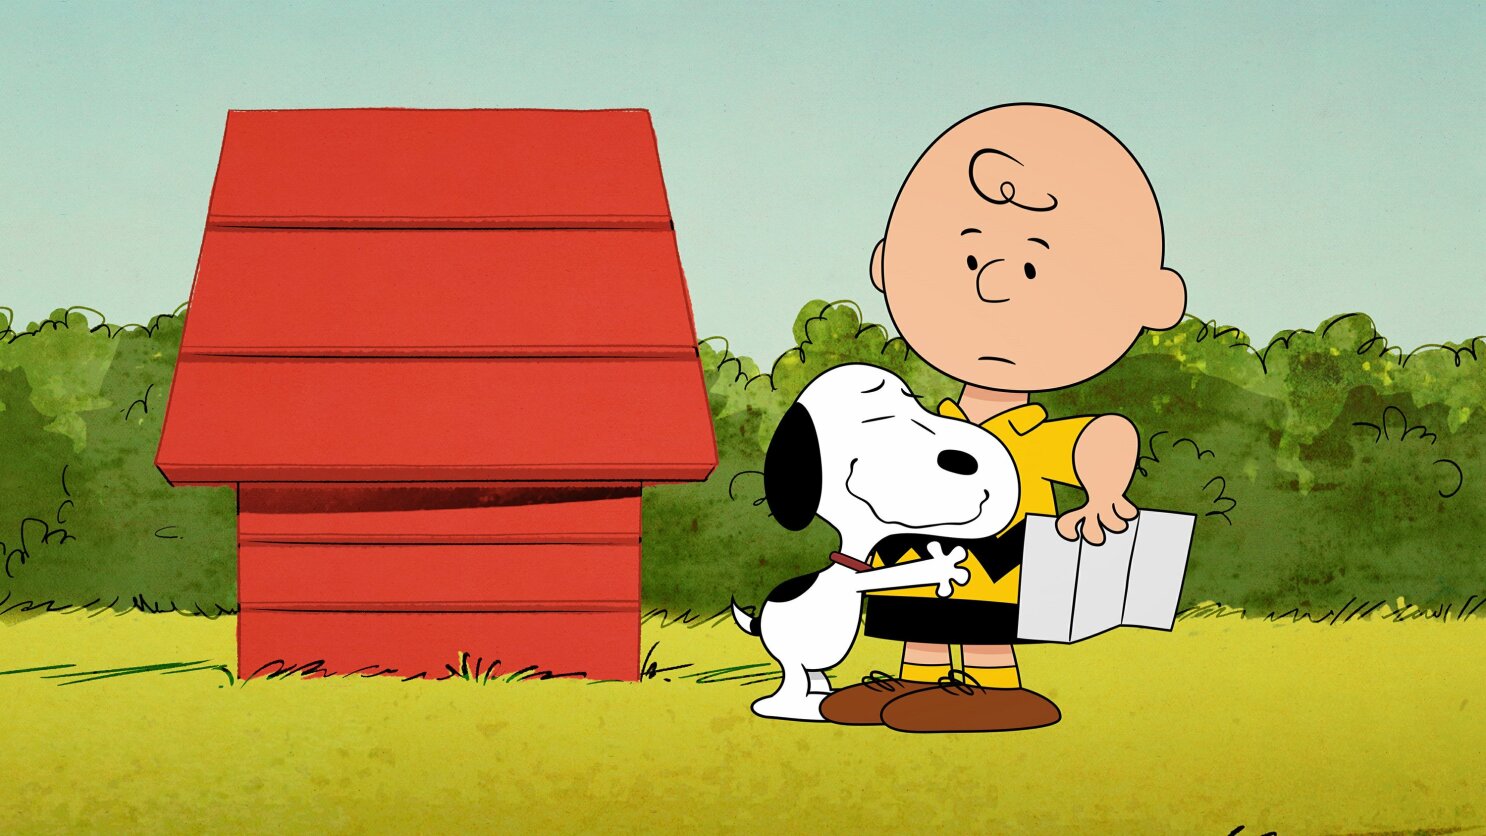 Apple is producing new content about Snoopy and other Peanuts characters